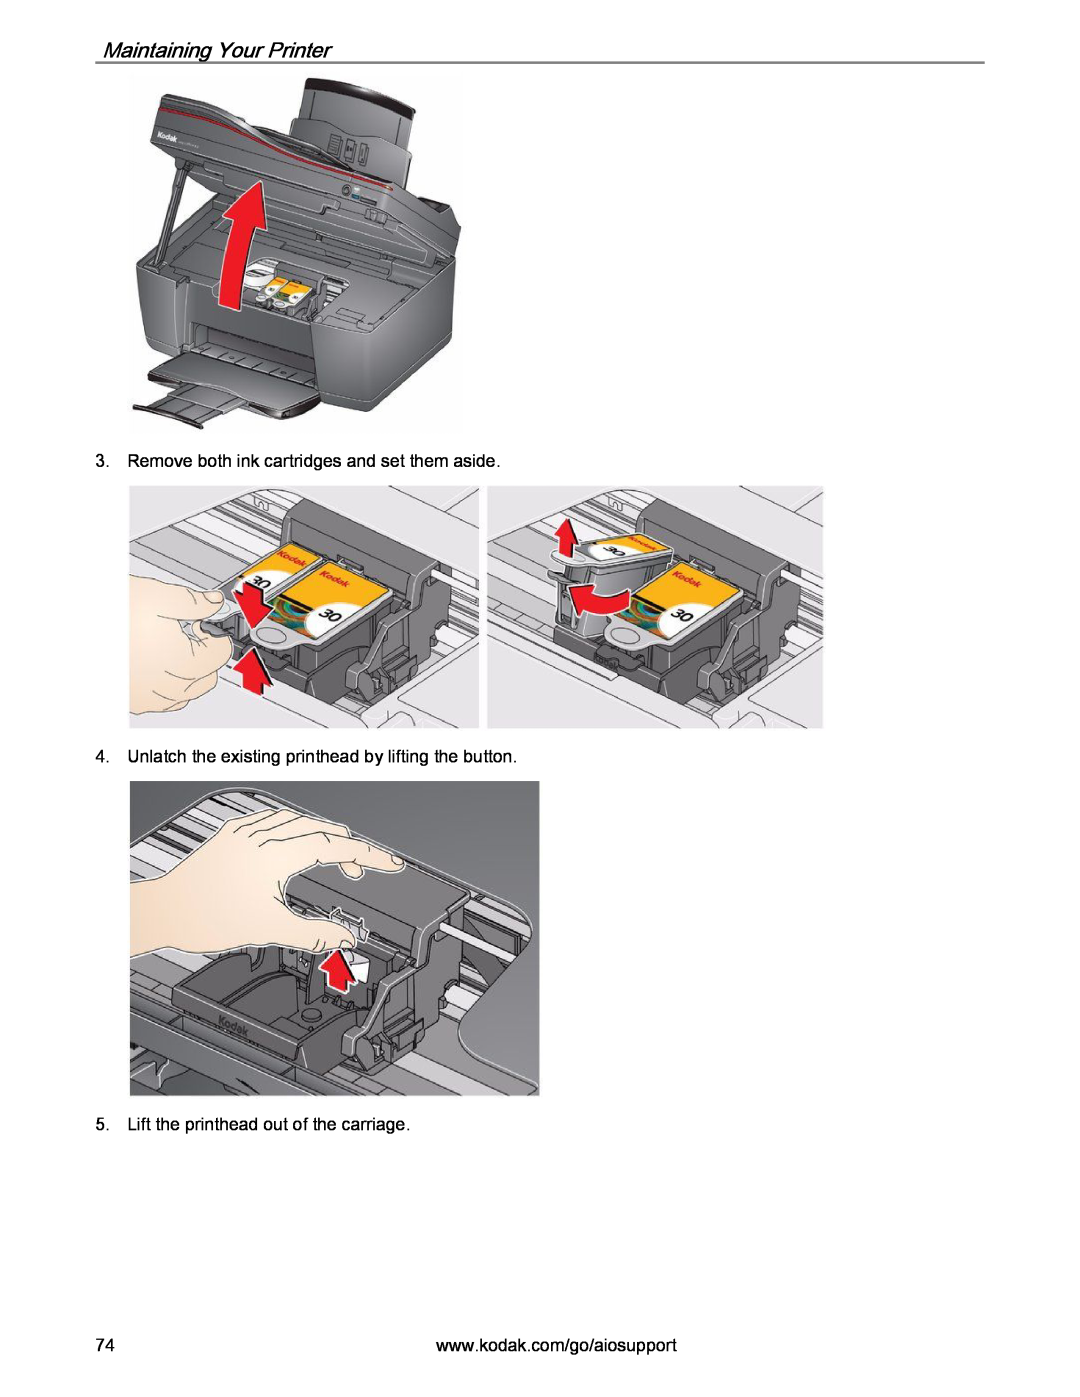 Kodak 2.2 Maintaining Your Printer, Remove both ink cartridges and set them aside, Lift the printhead out of the carriage 